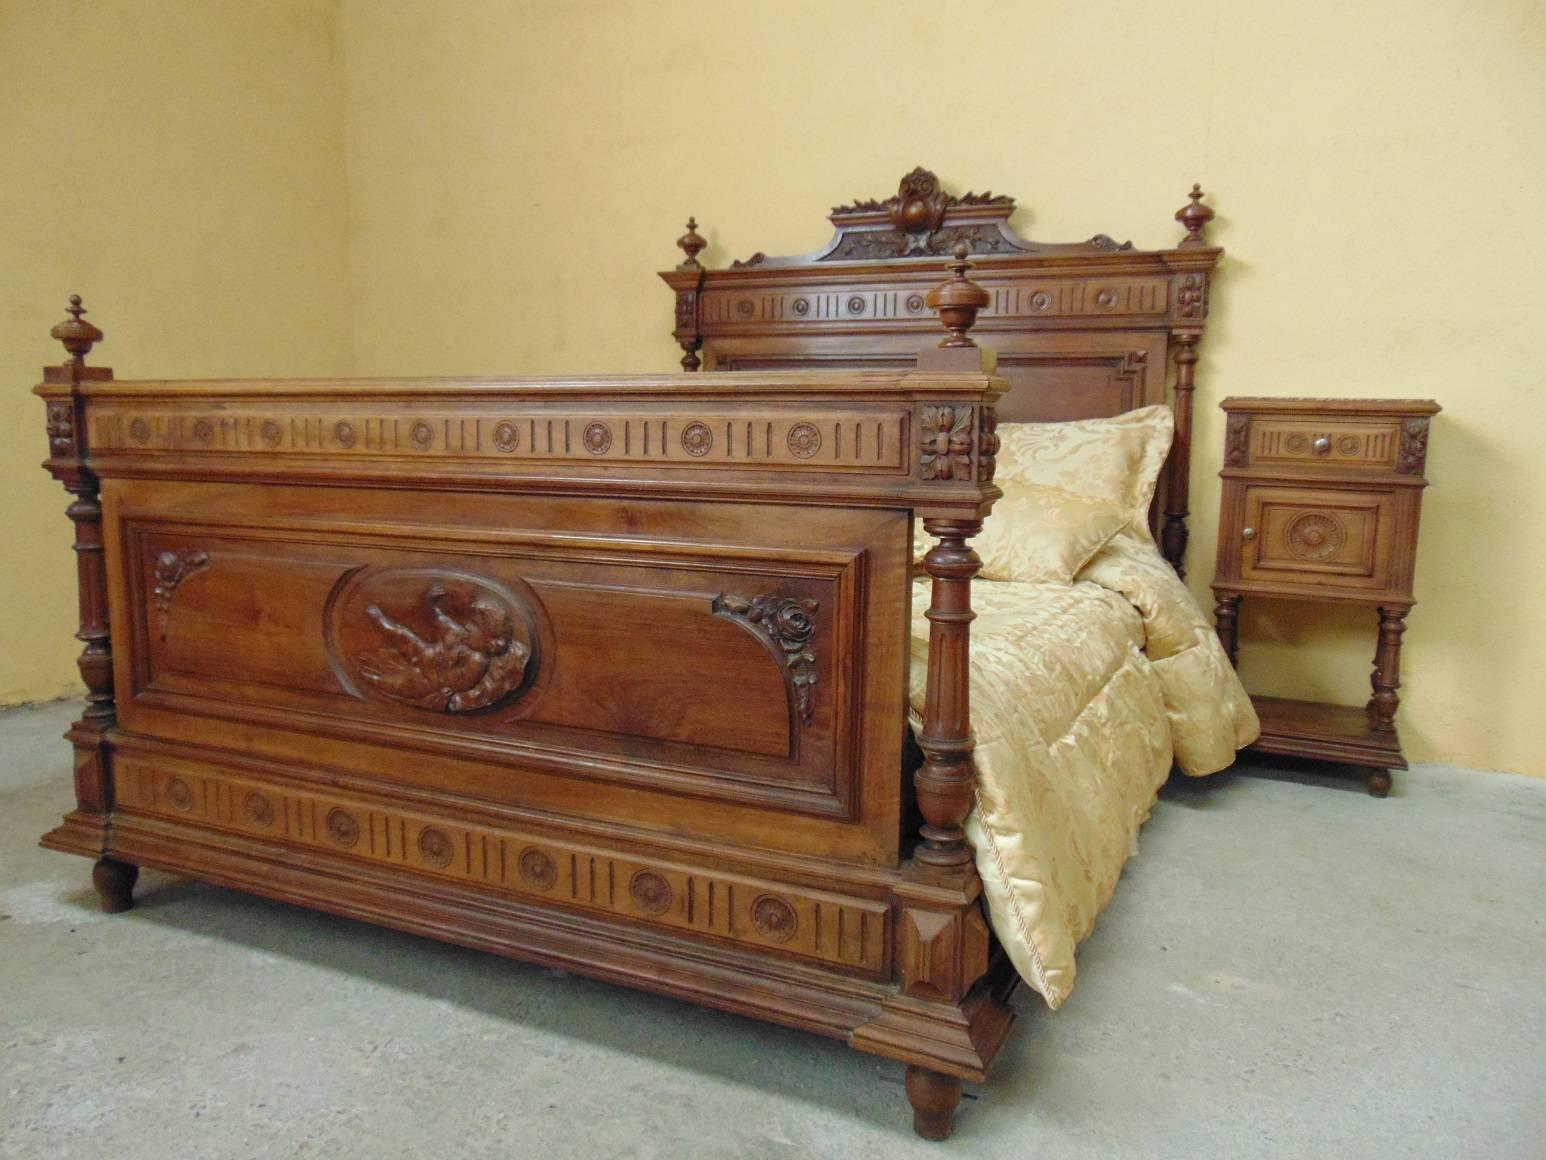 A fine and all original hand-carved double bed in the Louis XVI style circa 1890, depicting a Cherub on the footboard and profusely carved with foliage and geometric rondelles. Both the head and foot boards are flanked with turned and fluted columns